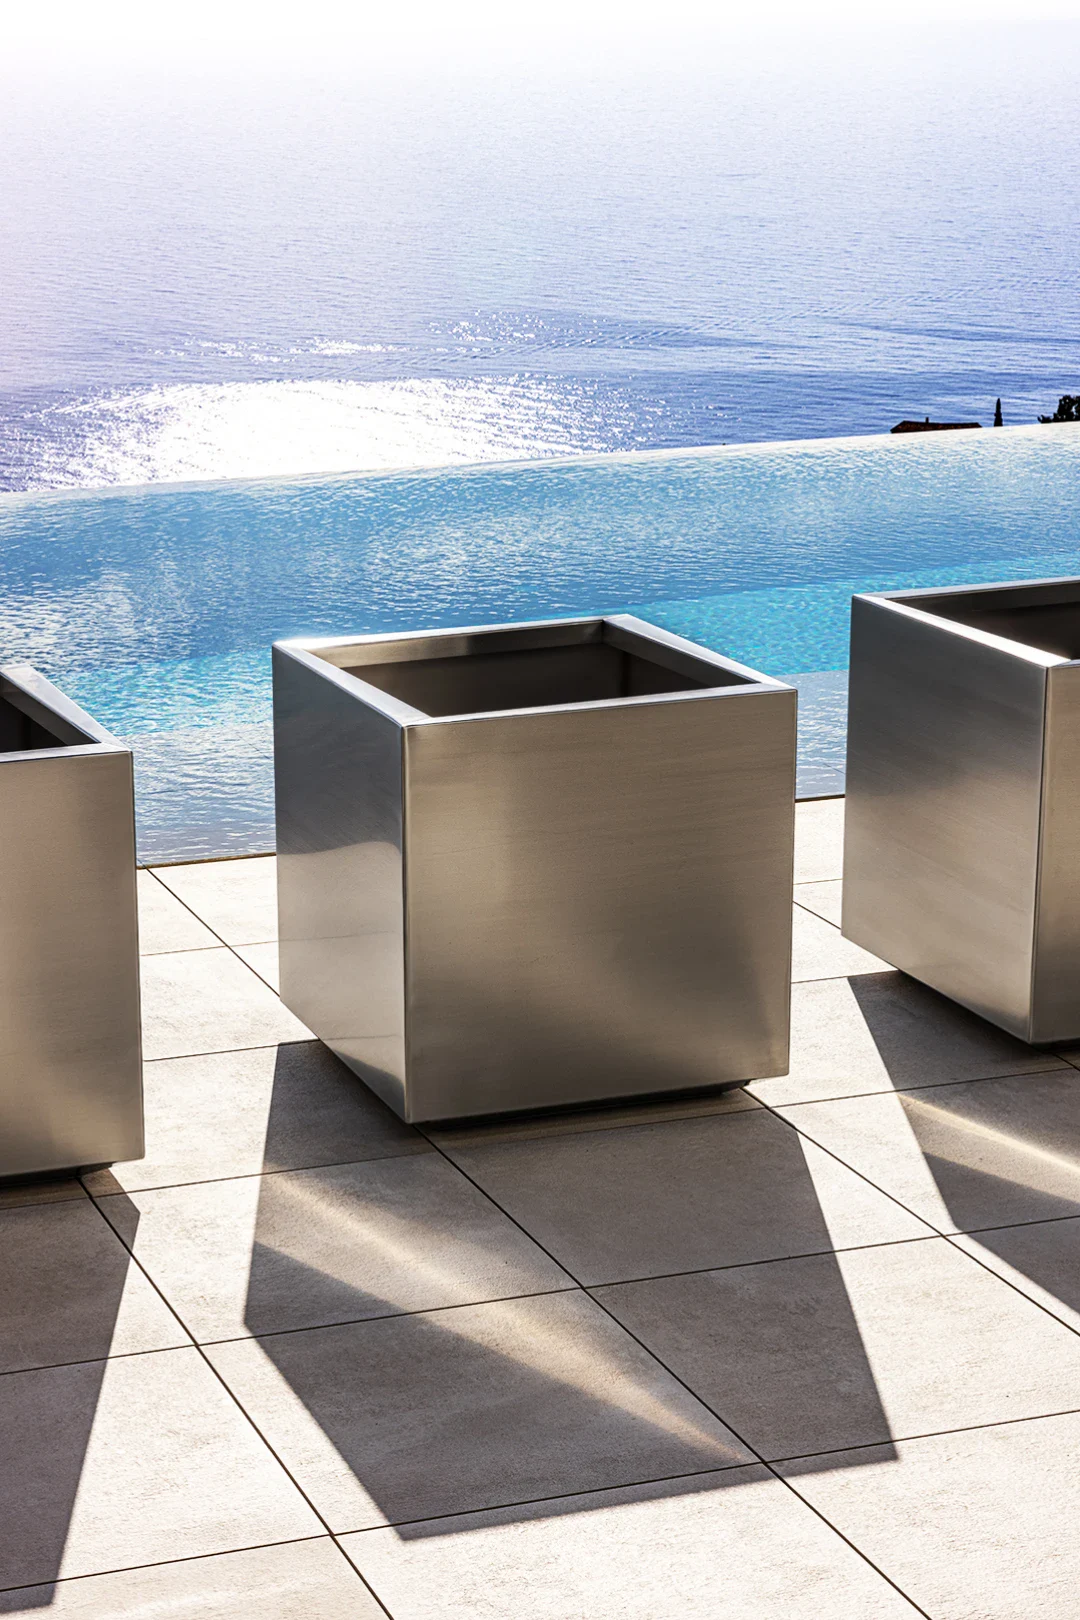 tall contemporary outdoor planters